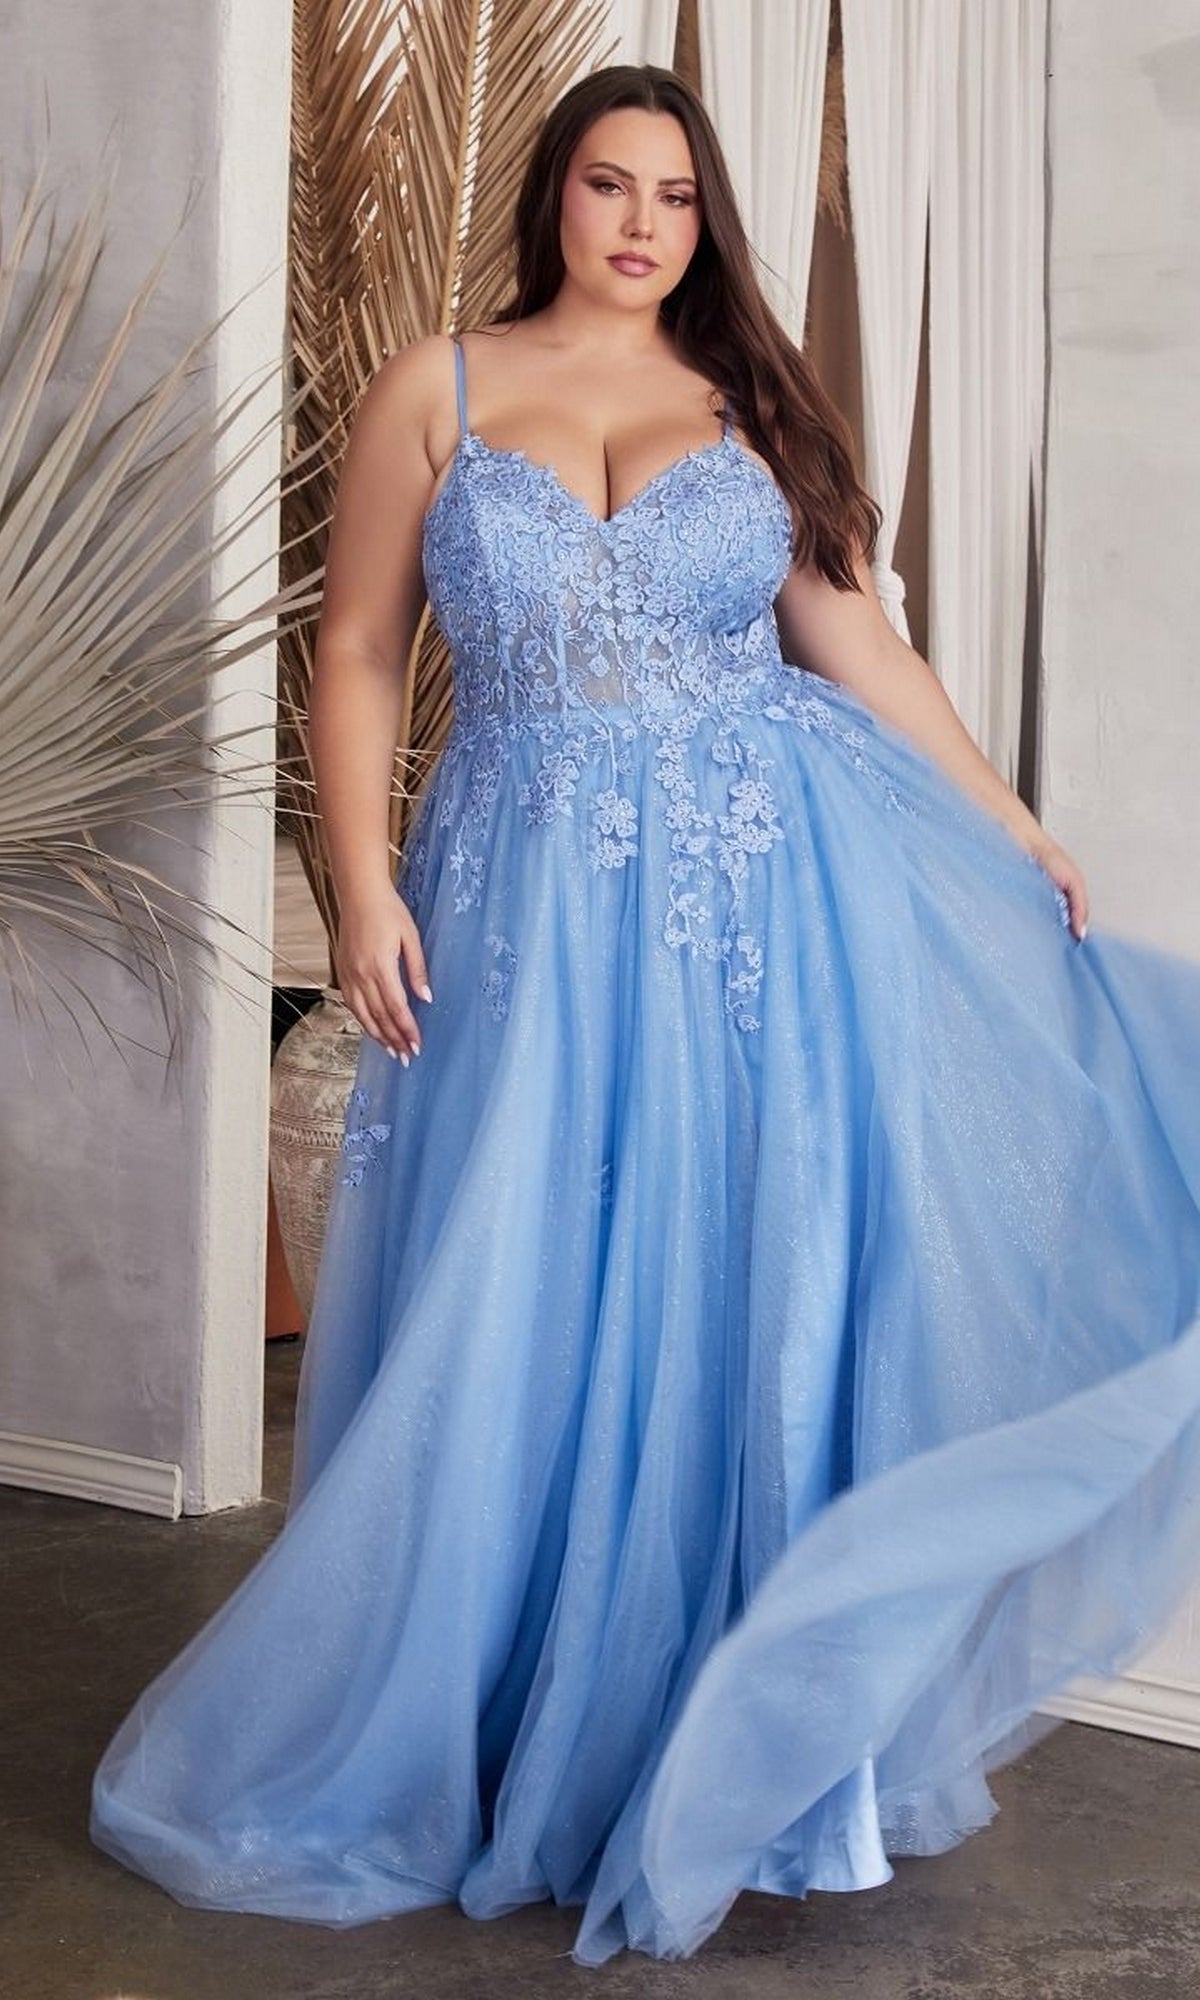 Lace-Up Back Plus-Size Long Prom Ball Gown C148C